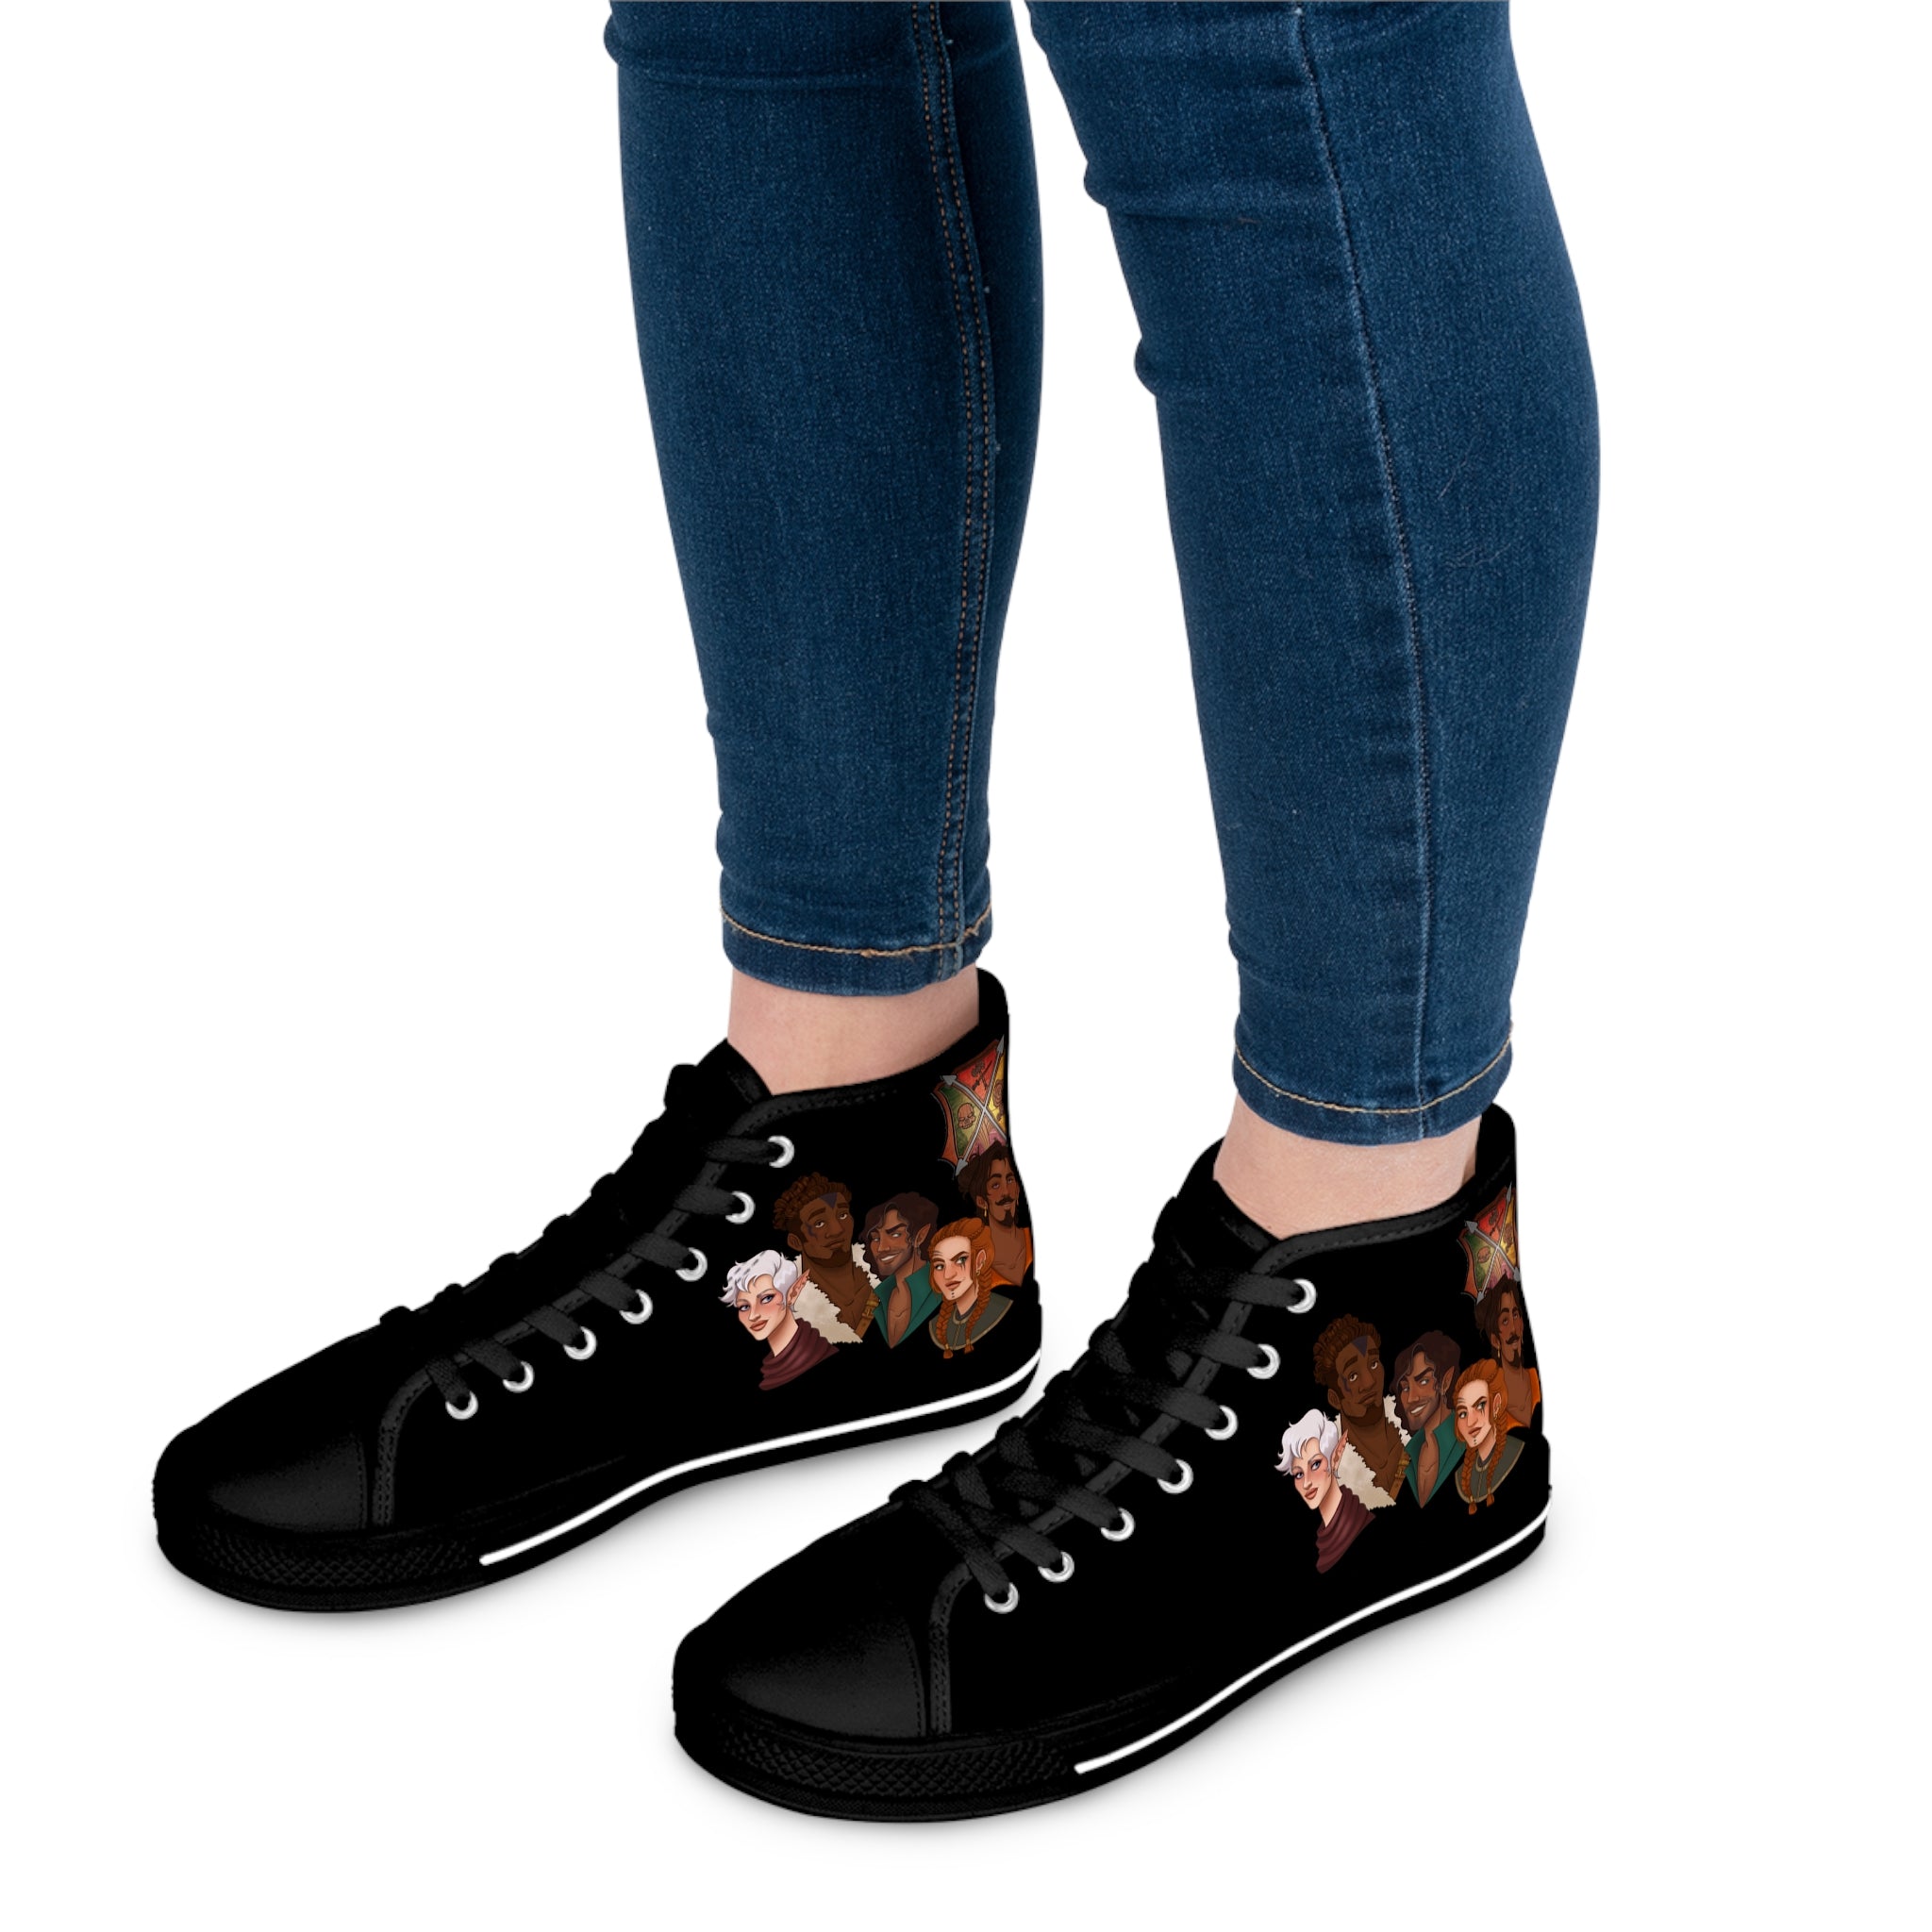 The Companions Women's High Top Sneakers